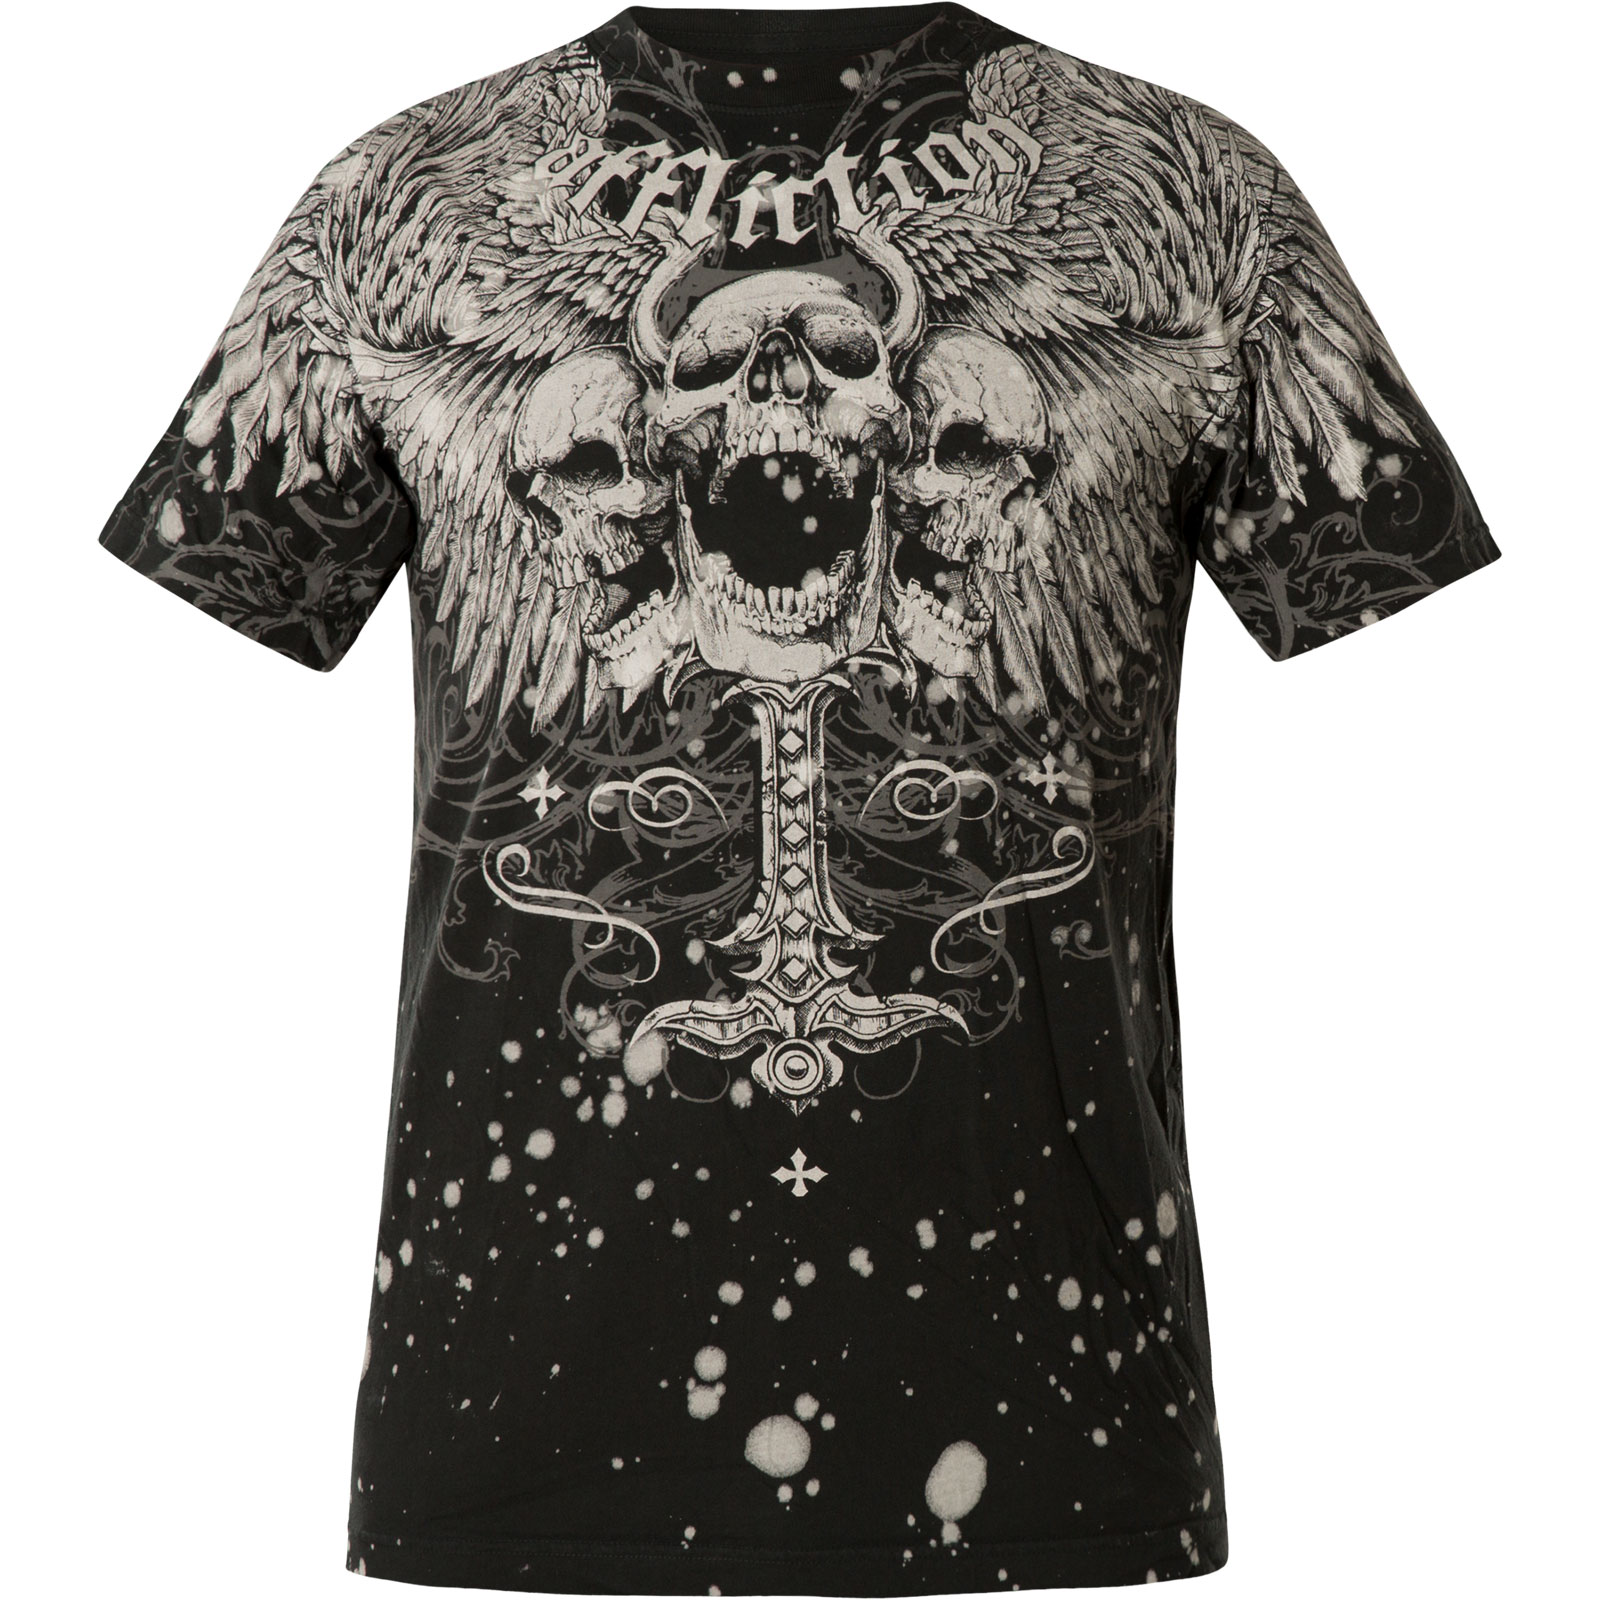 Affliction Saint Scream Print of a cross, skulls with wings